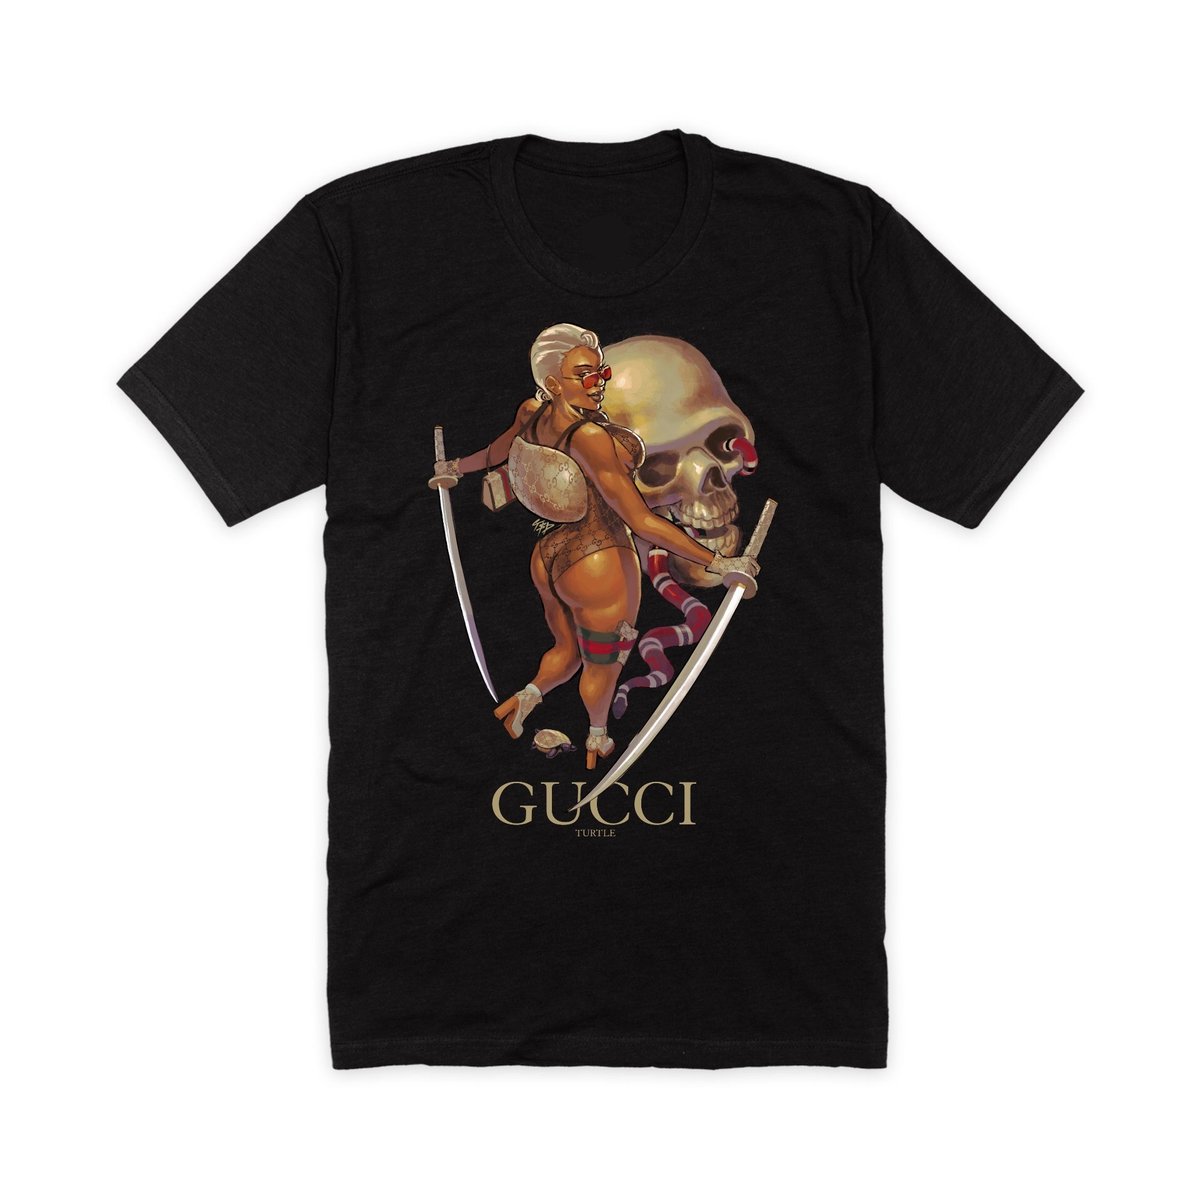 Image of Gucci Turtle T-Shirt